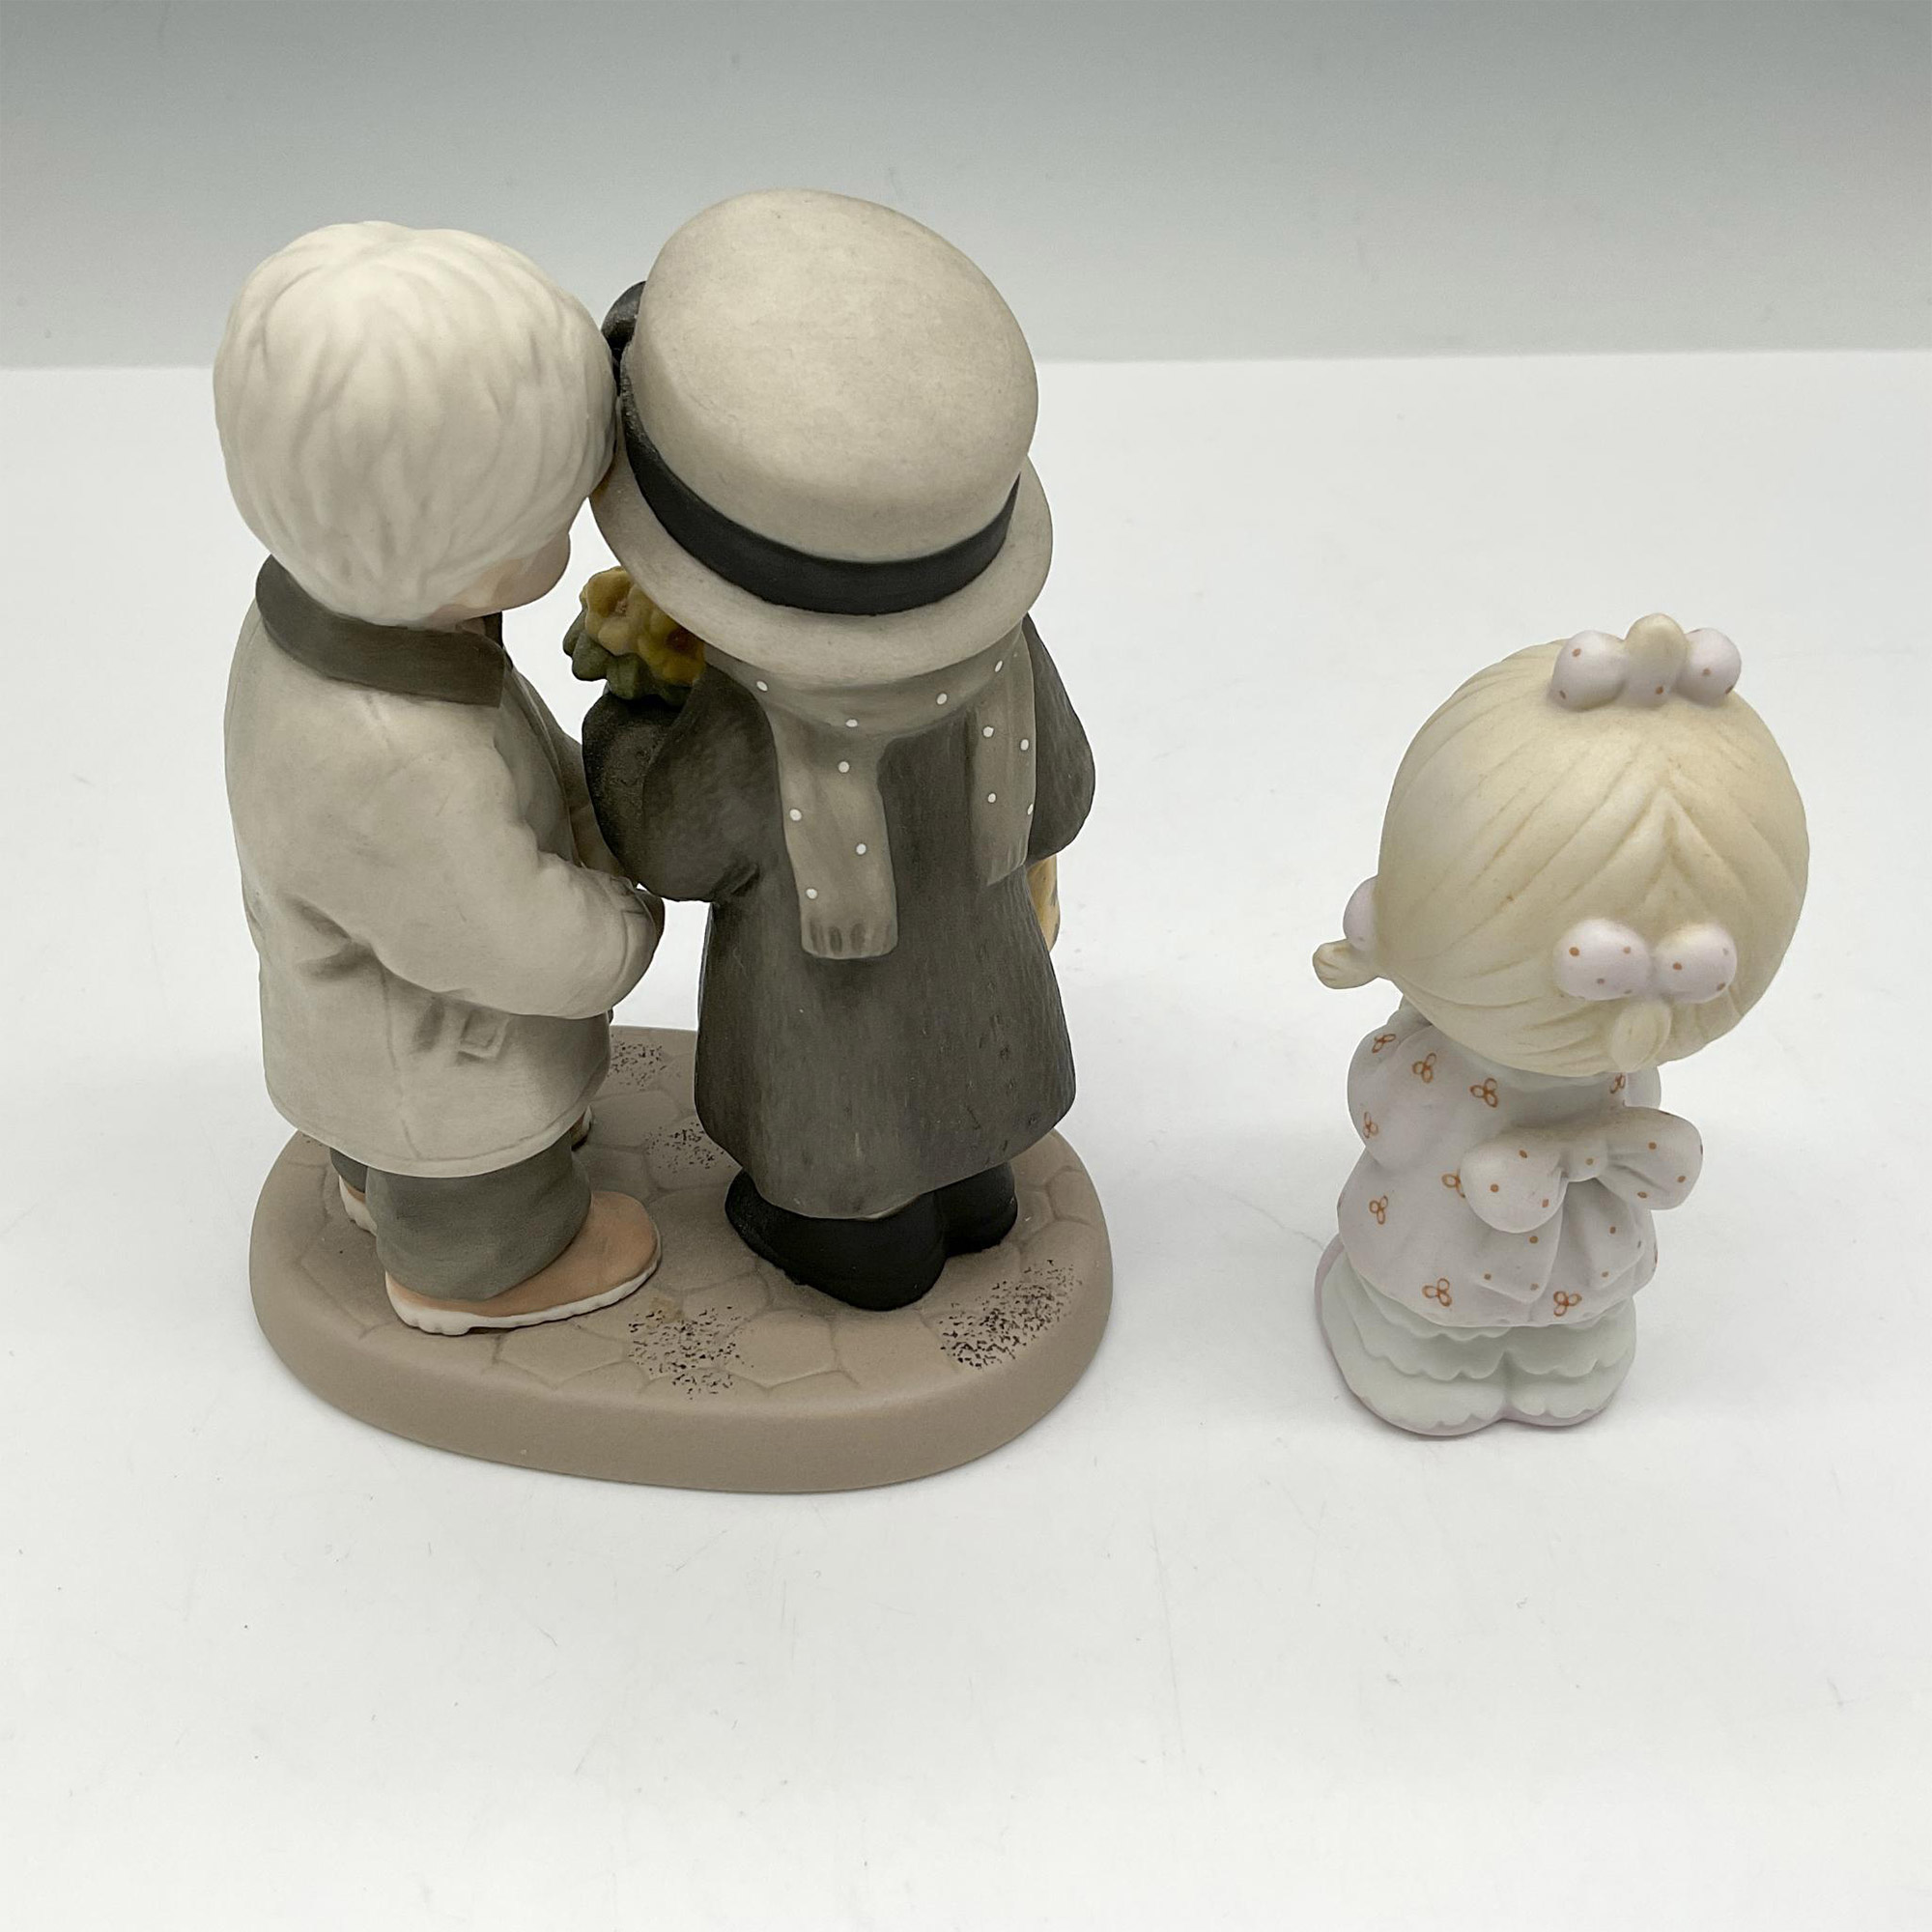 2pc Enesco Group Ceramic Figurines, Flower Girl + Your Love - Image 2 of 3